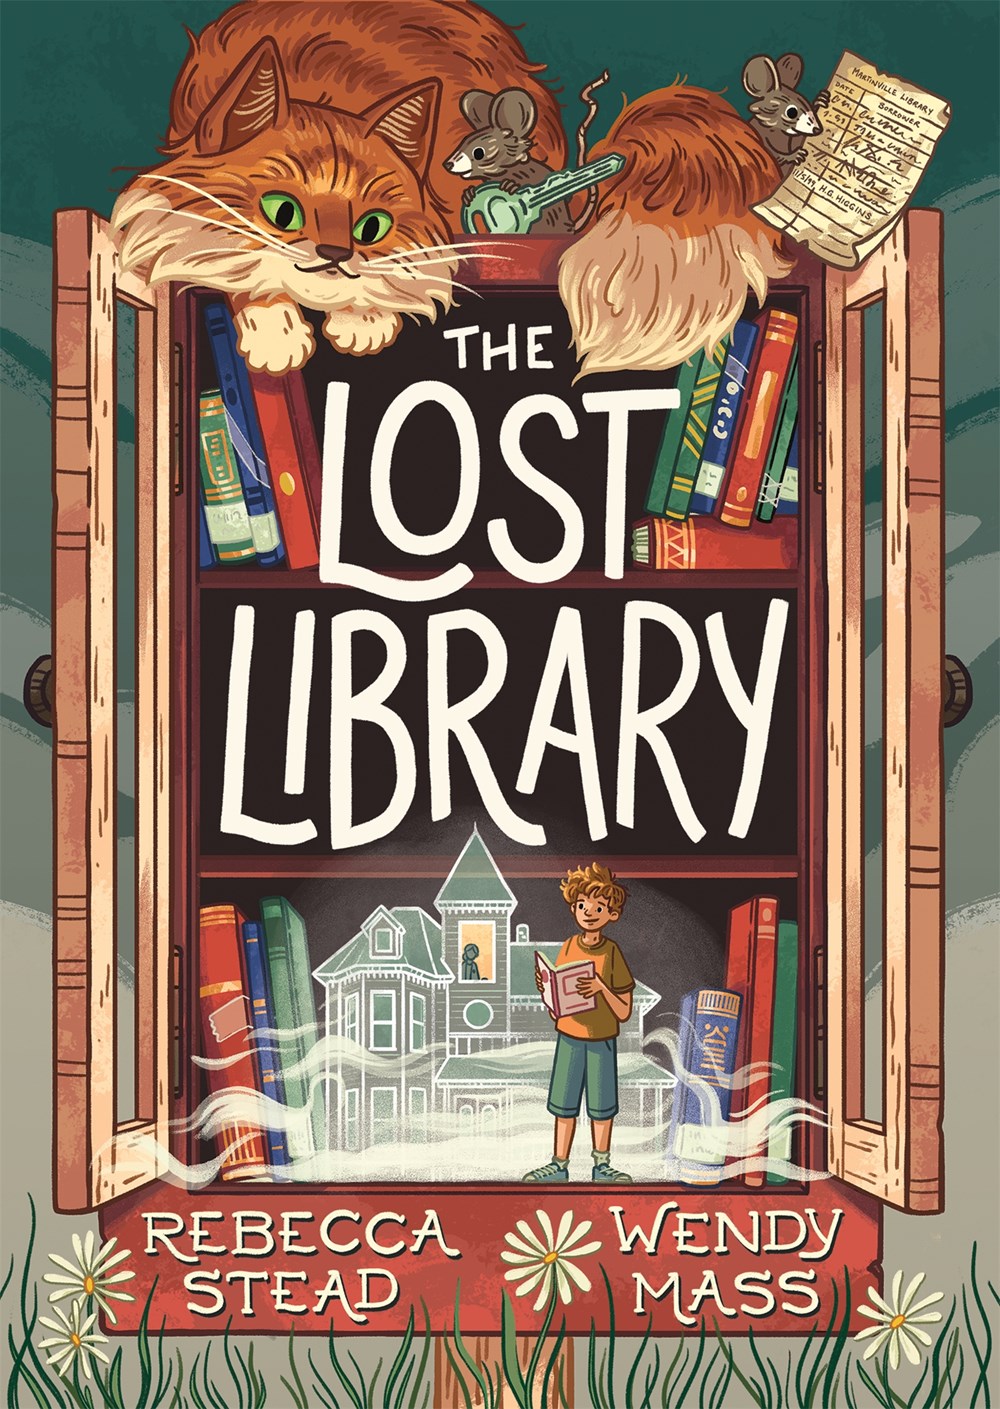 The Lost Library by Rebecca Stead